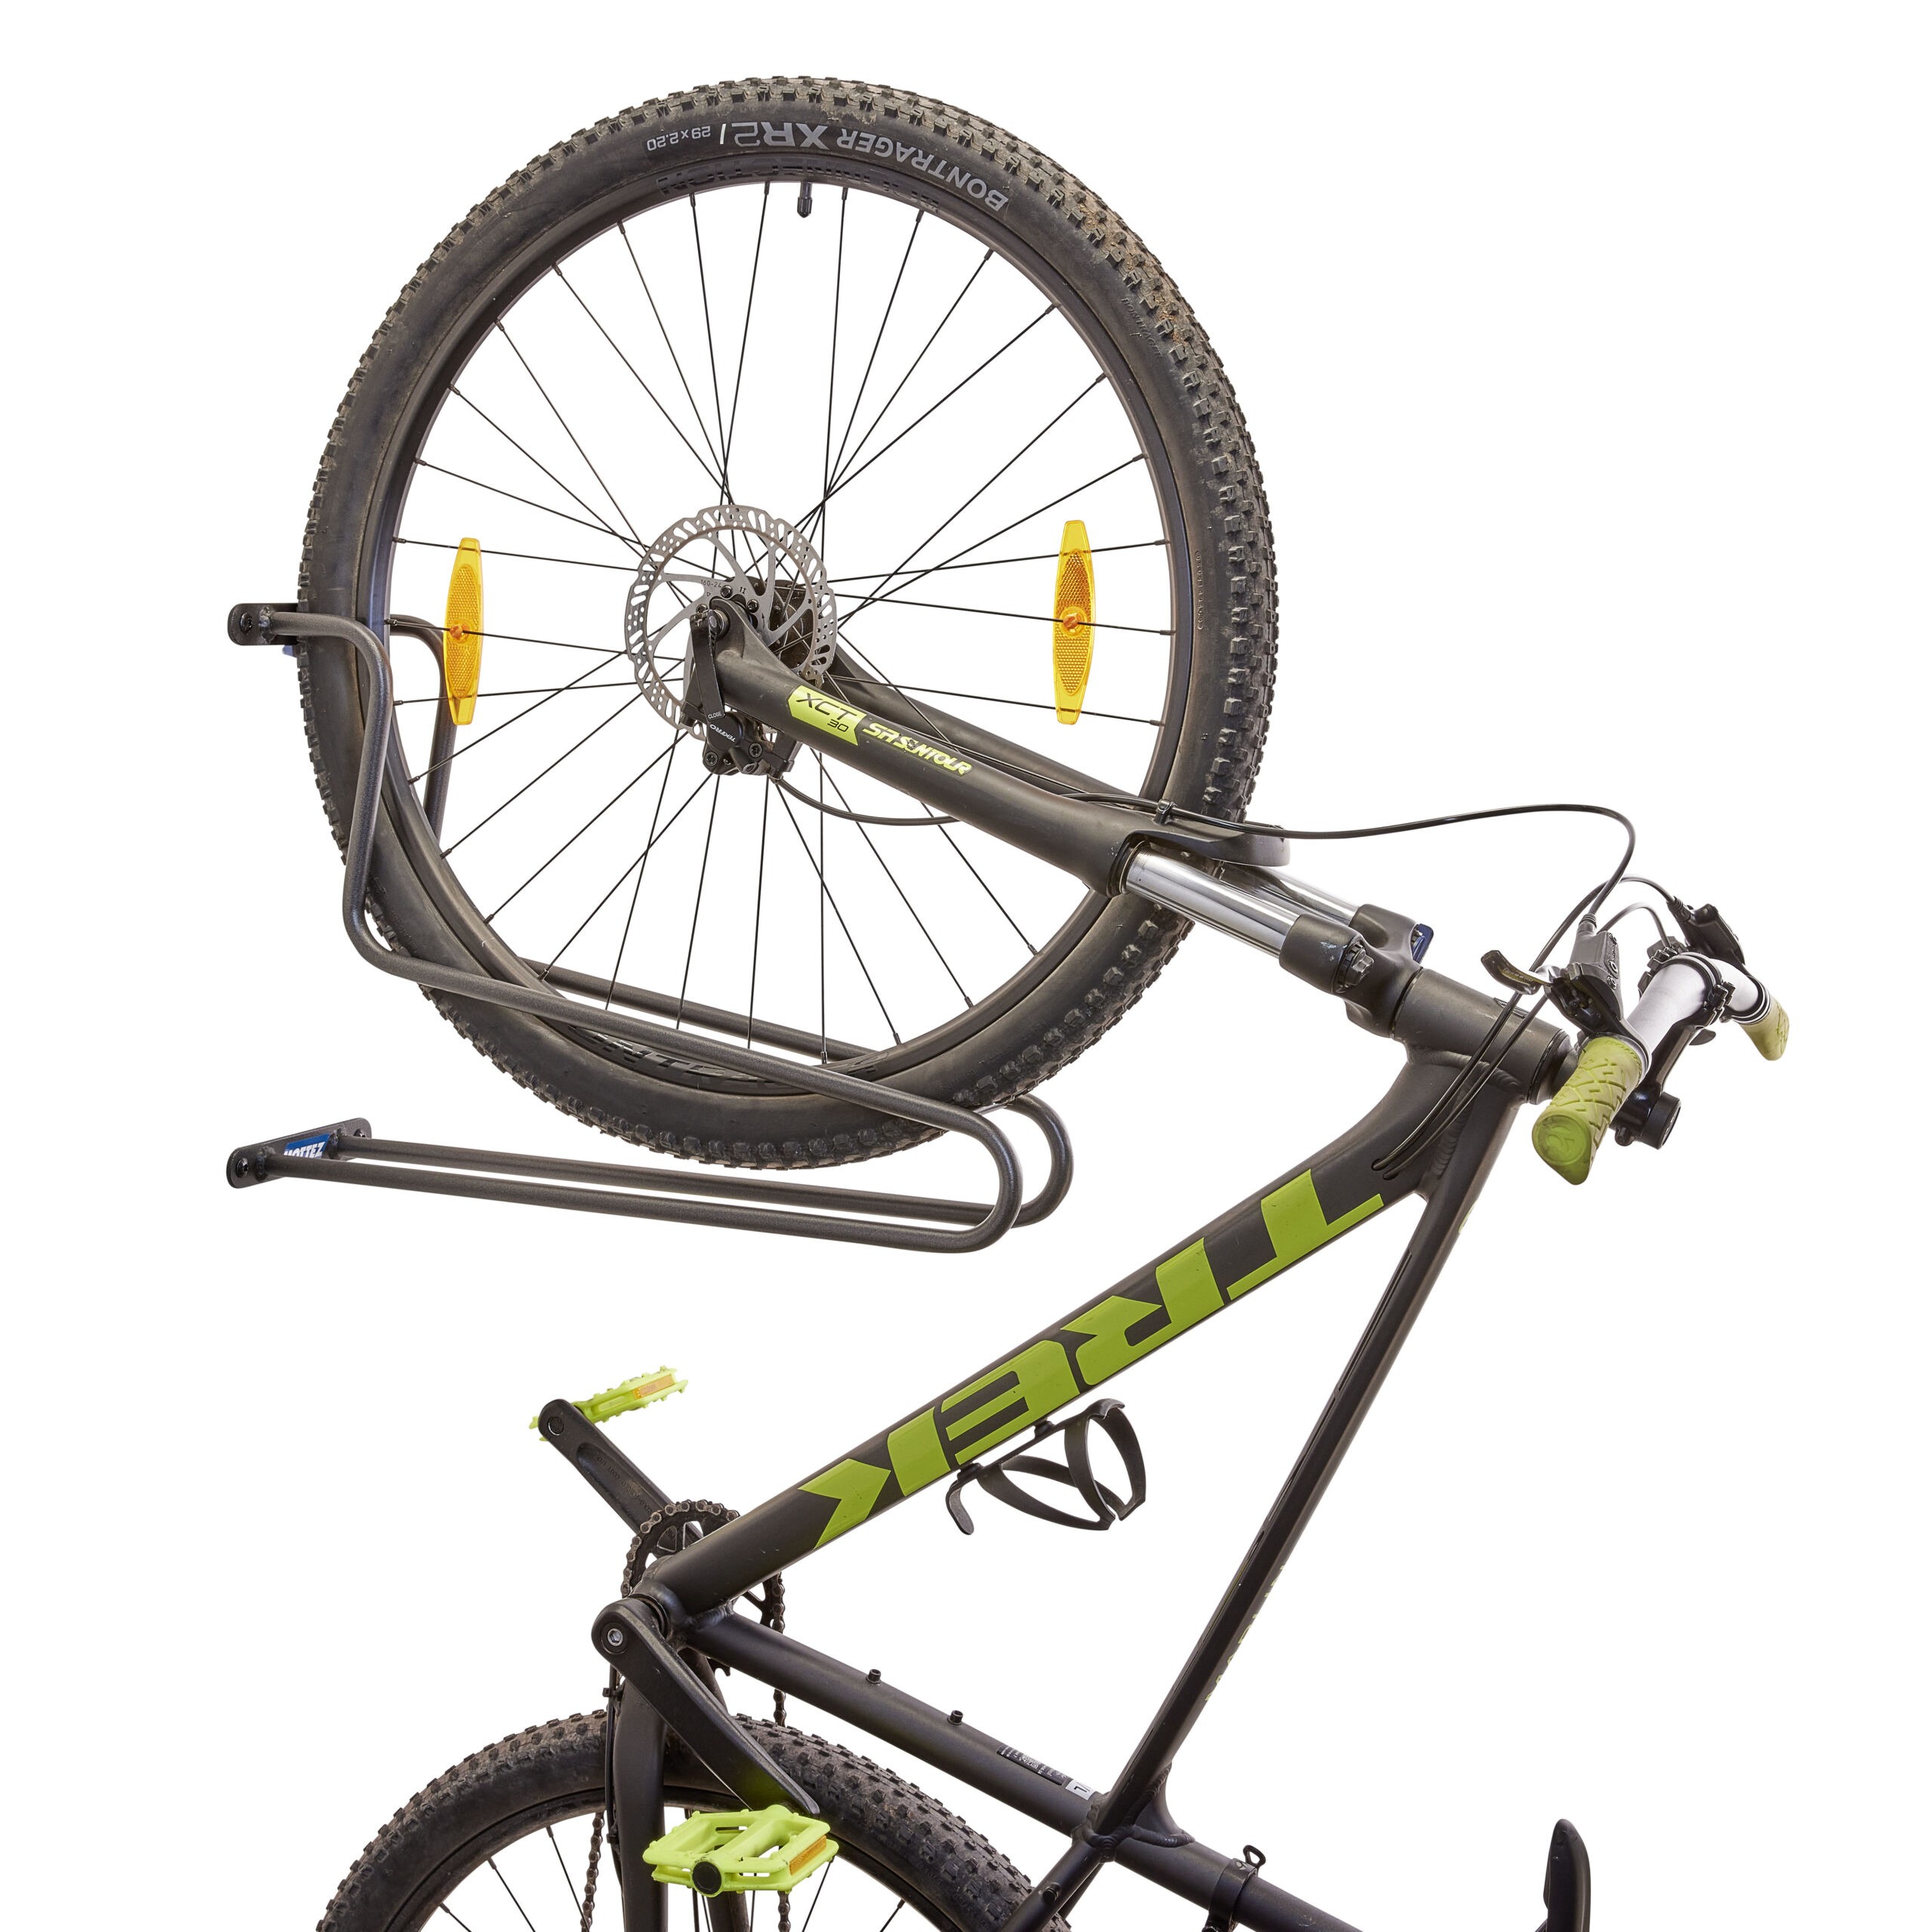 A fixed vertical bicycle holder for fixing a bicycle tire M091S is attached to the wall